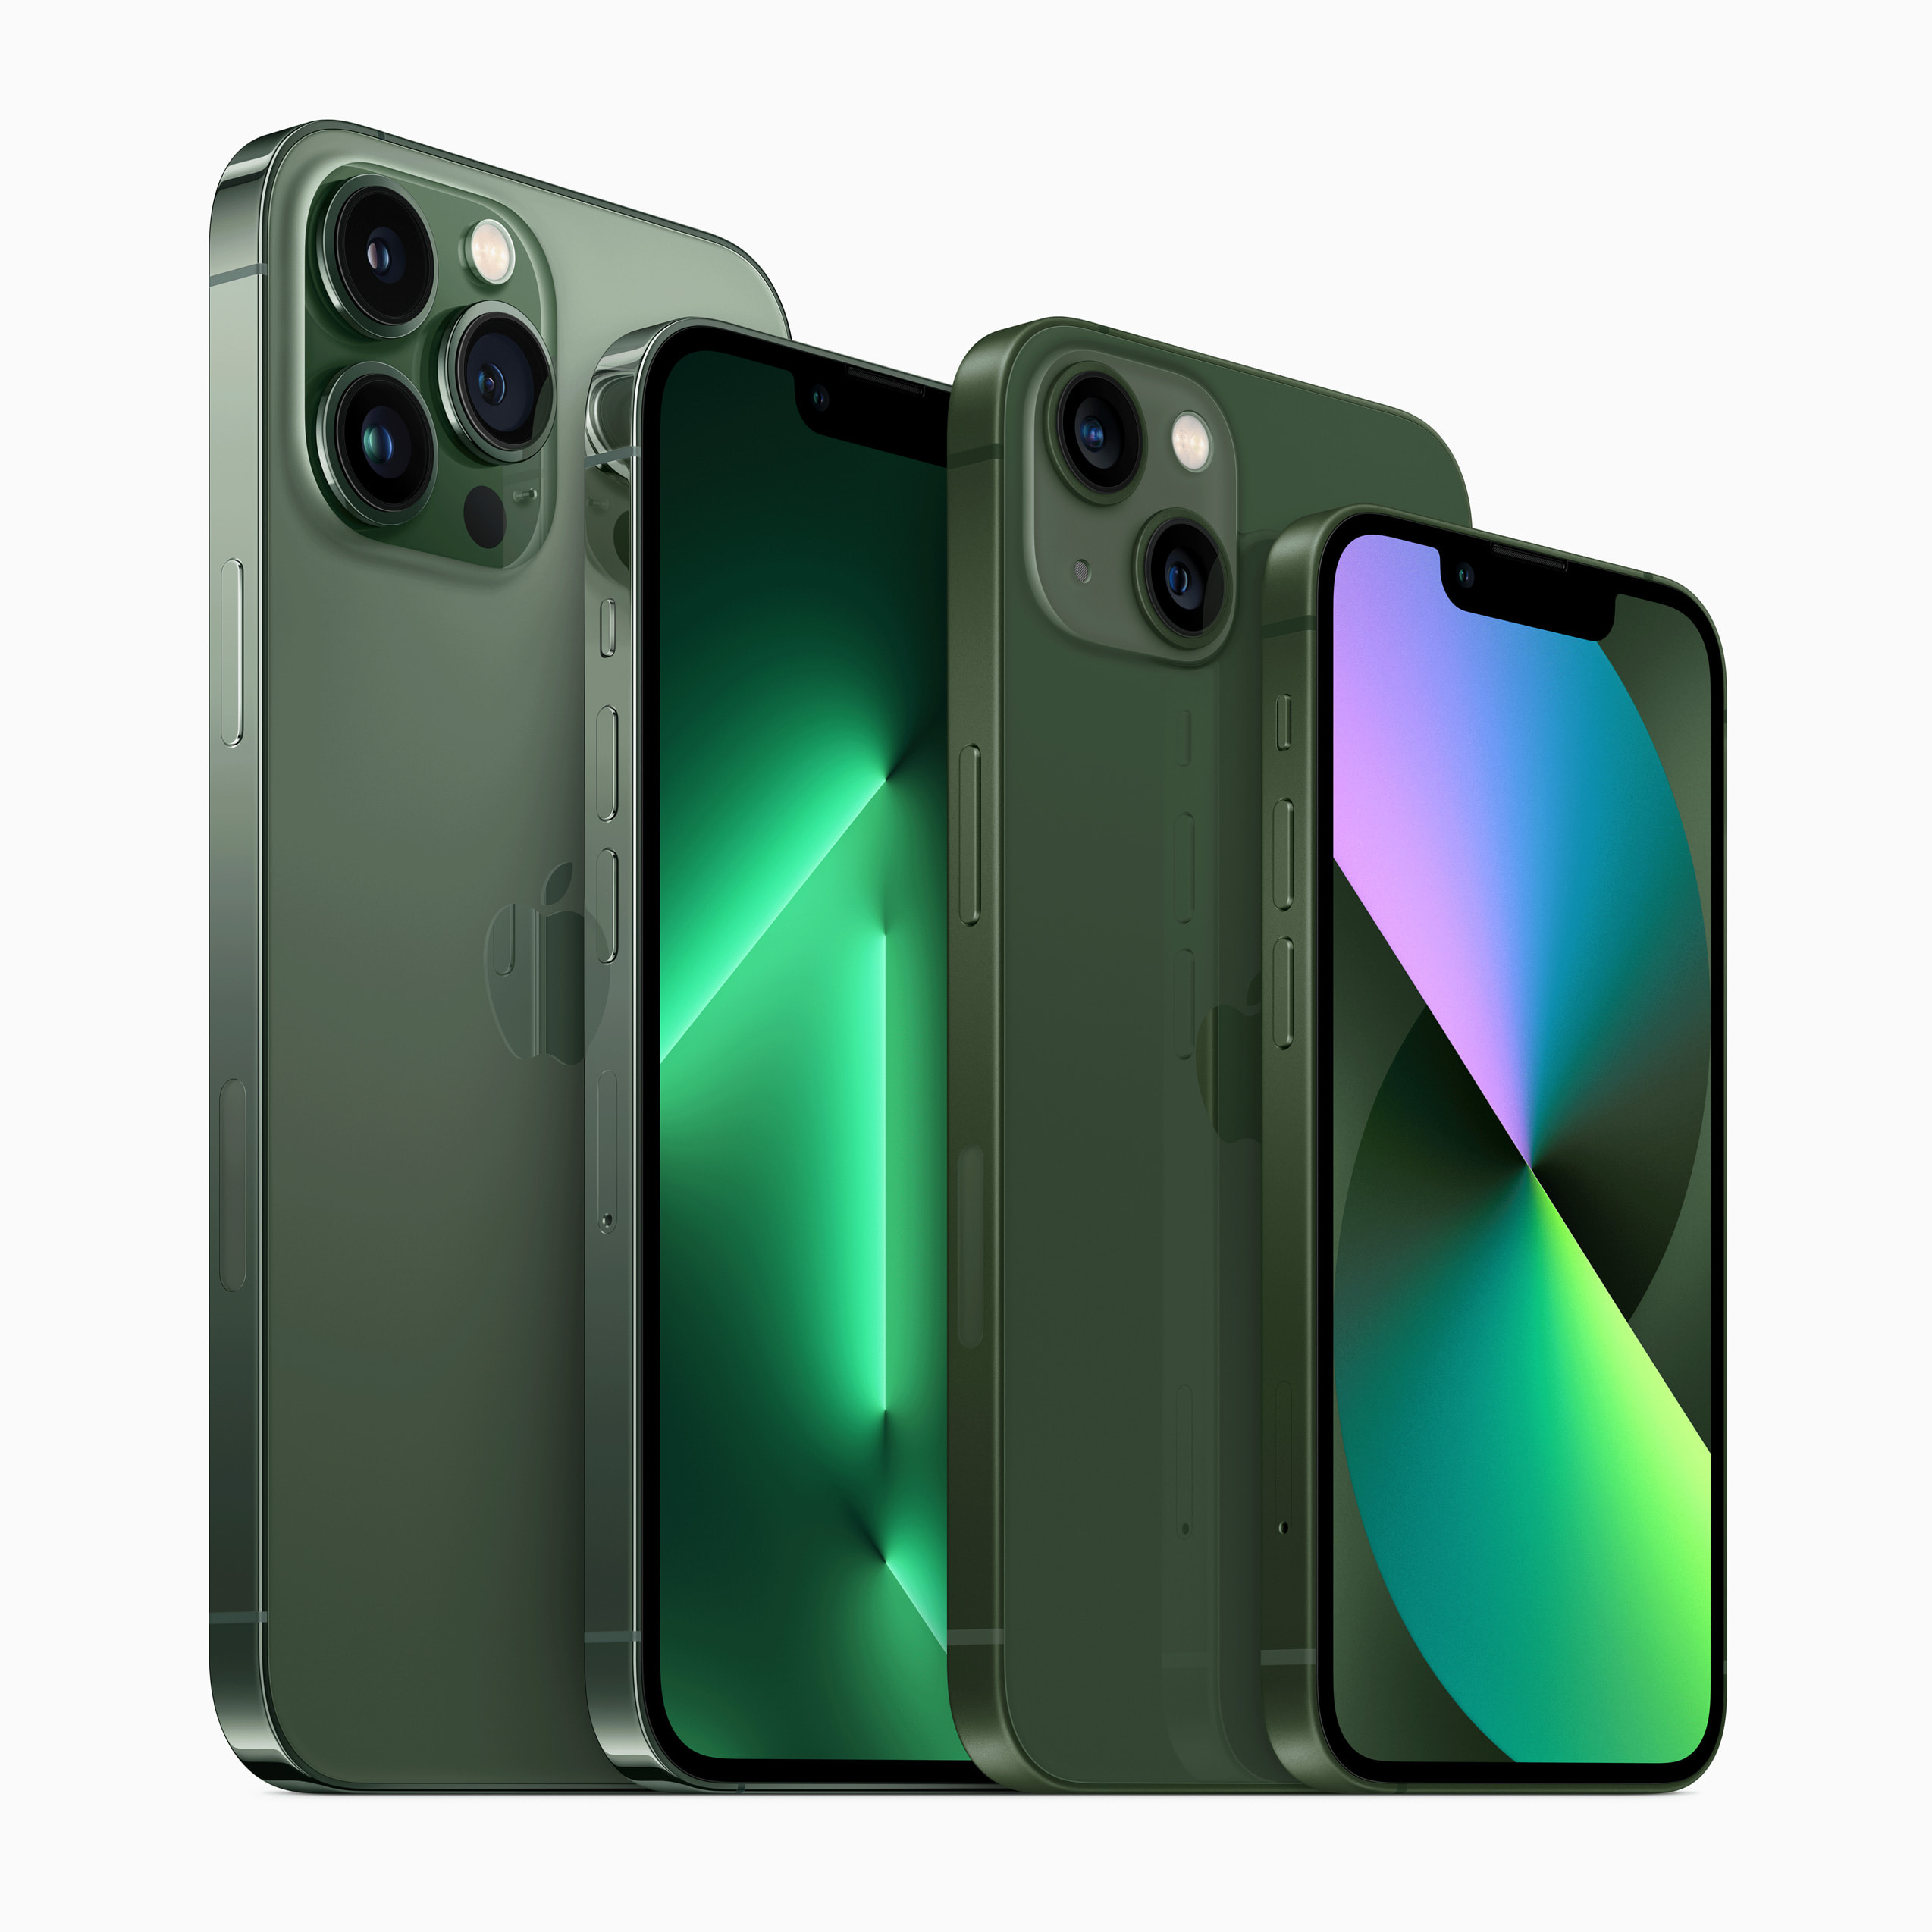 Apple iPhone 13 Pro Max 5G: Prices, Colors, Sizes, Features & Specs